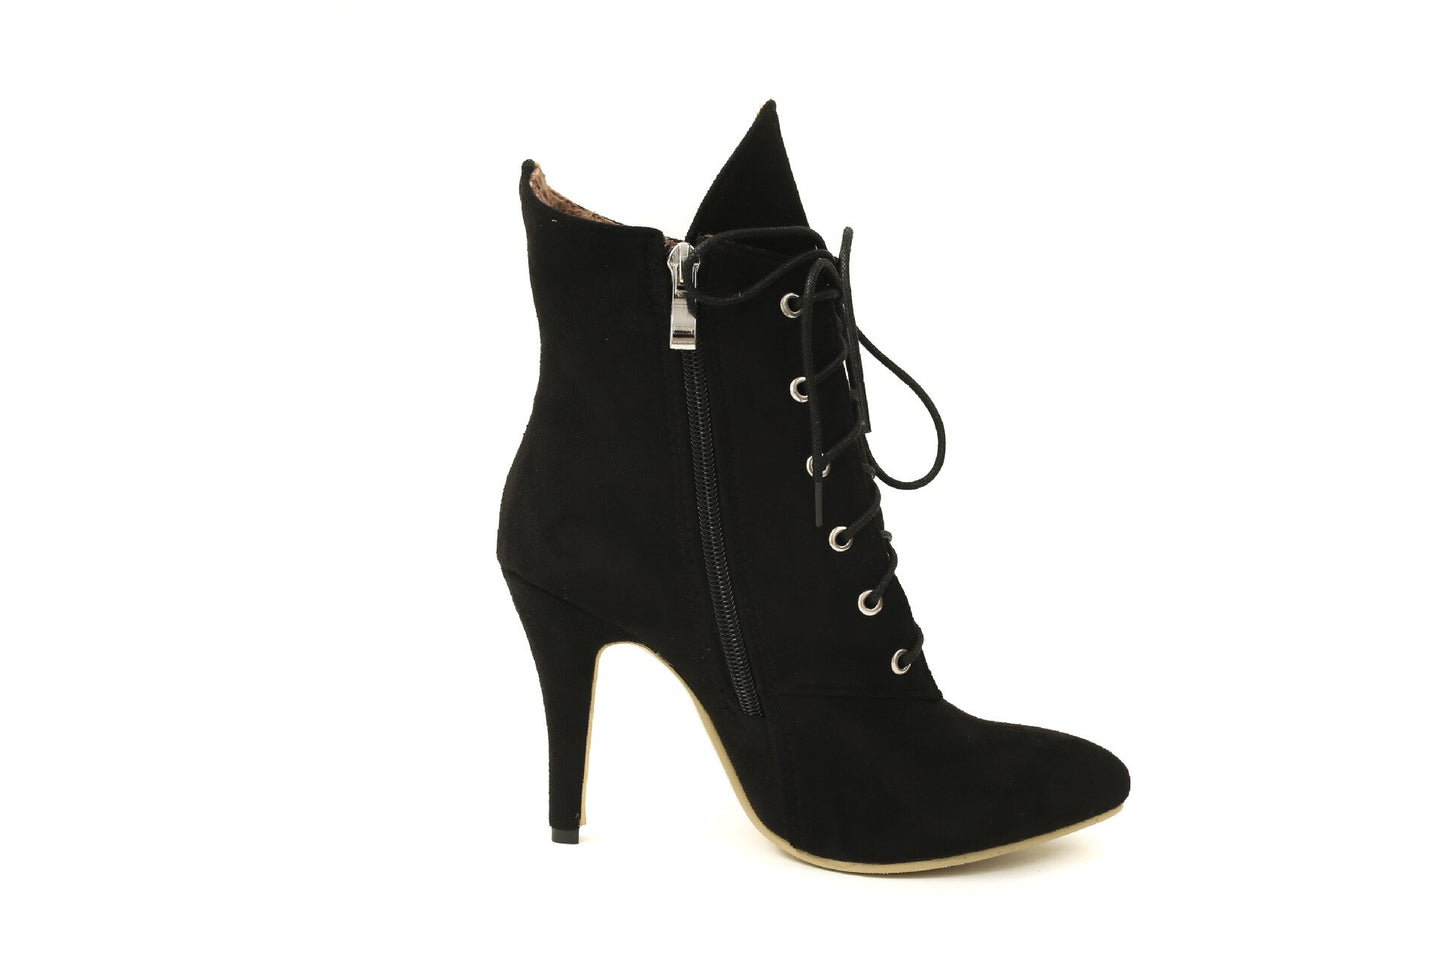 High Heel Fashion Pointed Toe Lace Up Ankle Boots